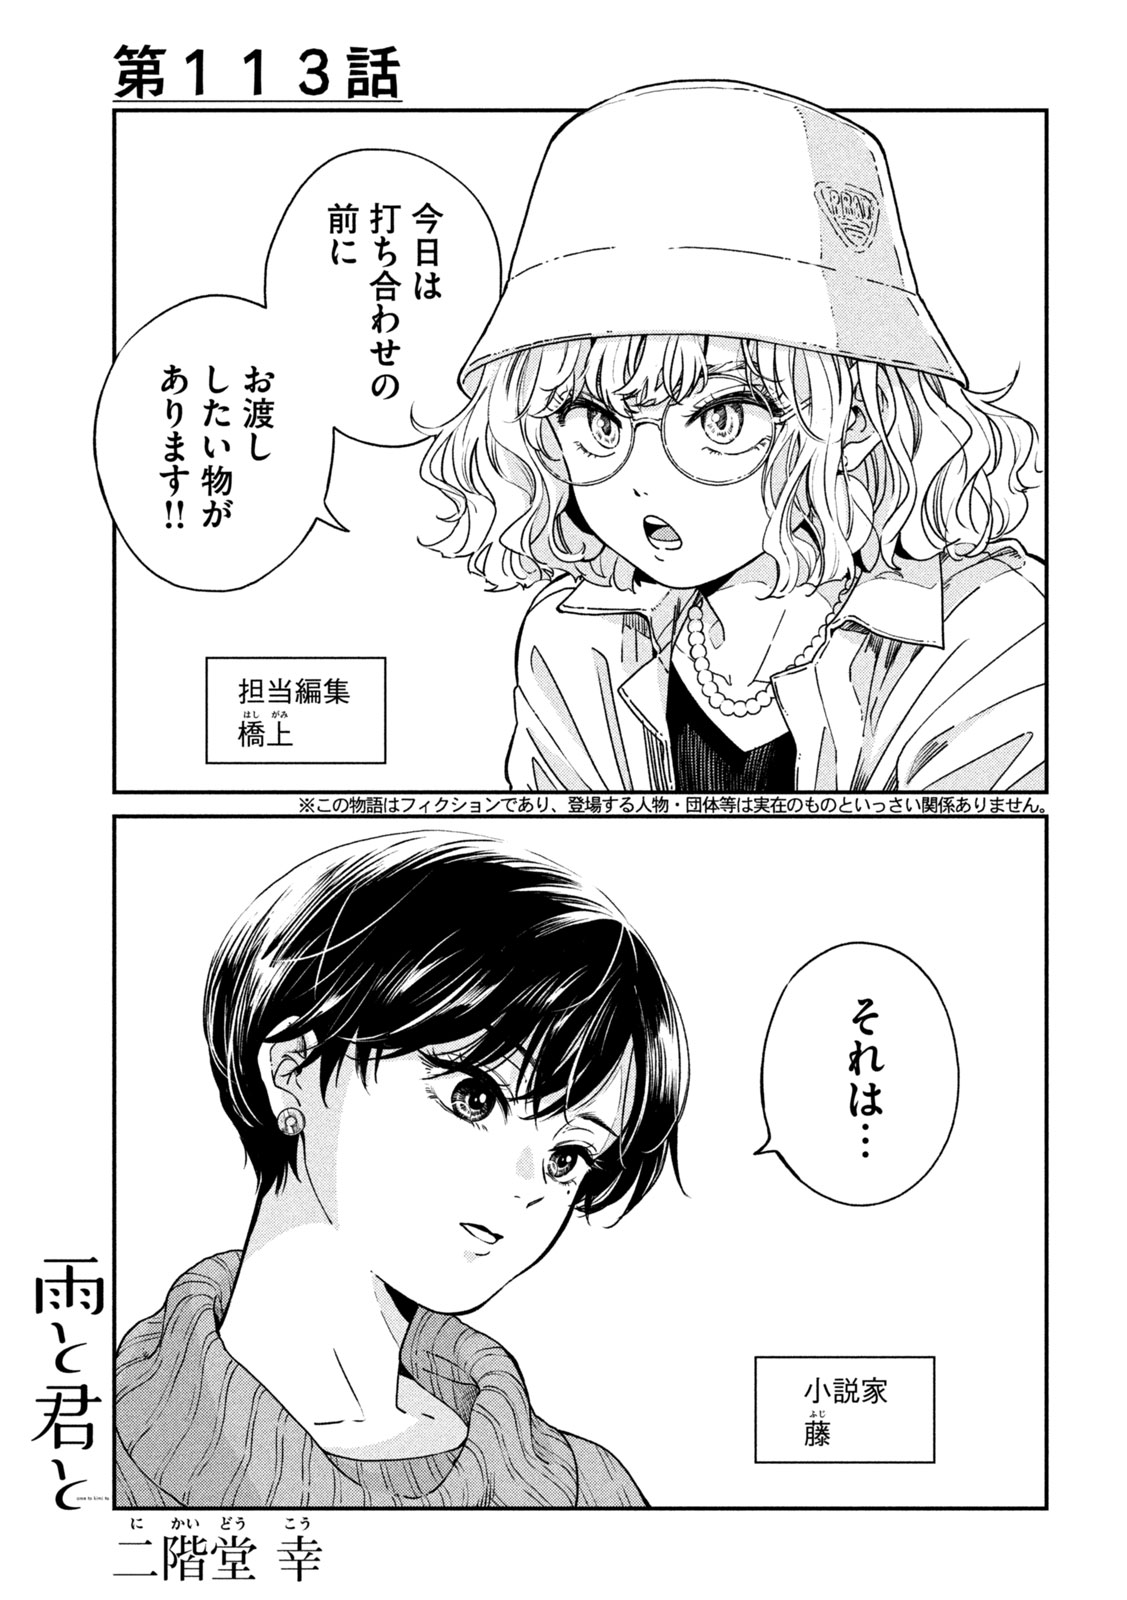 Ame to Kimi to - Chapter 113 - Page 1